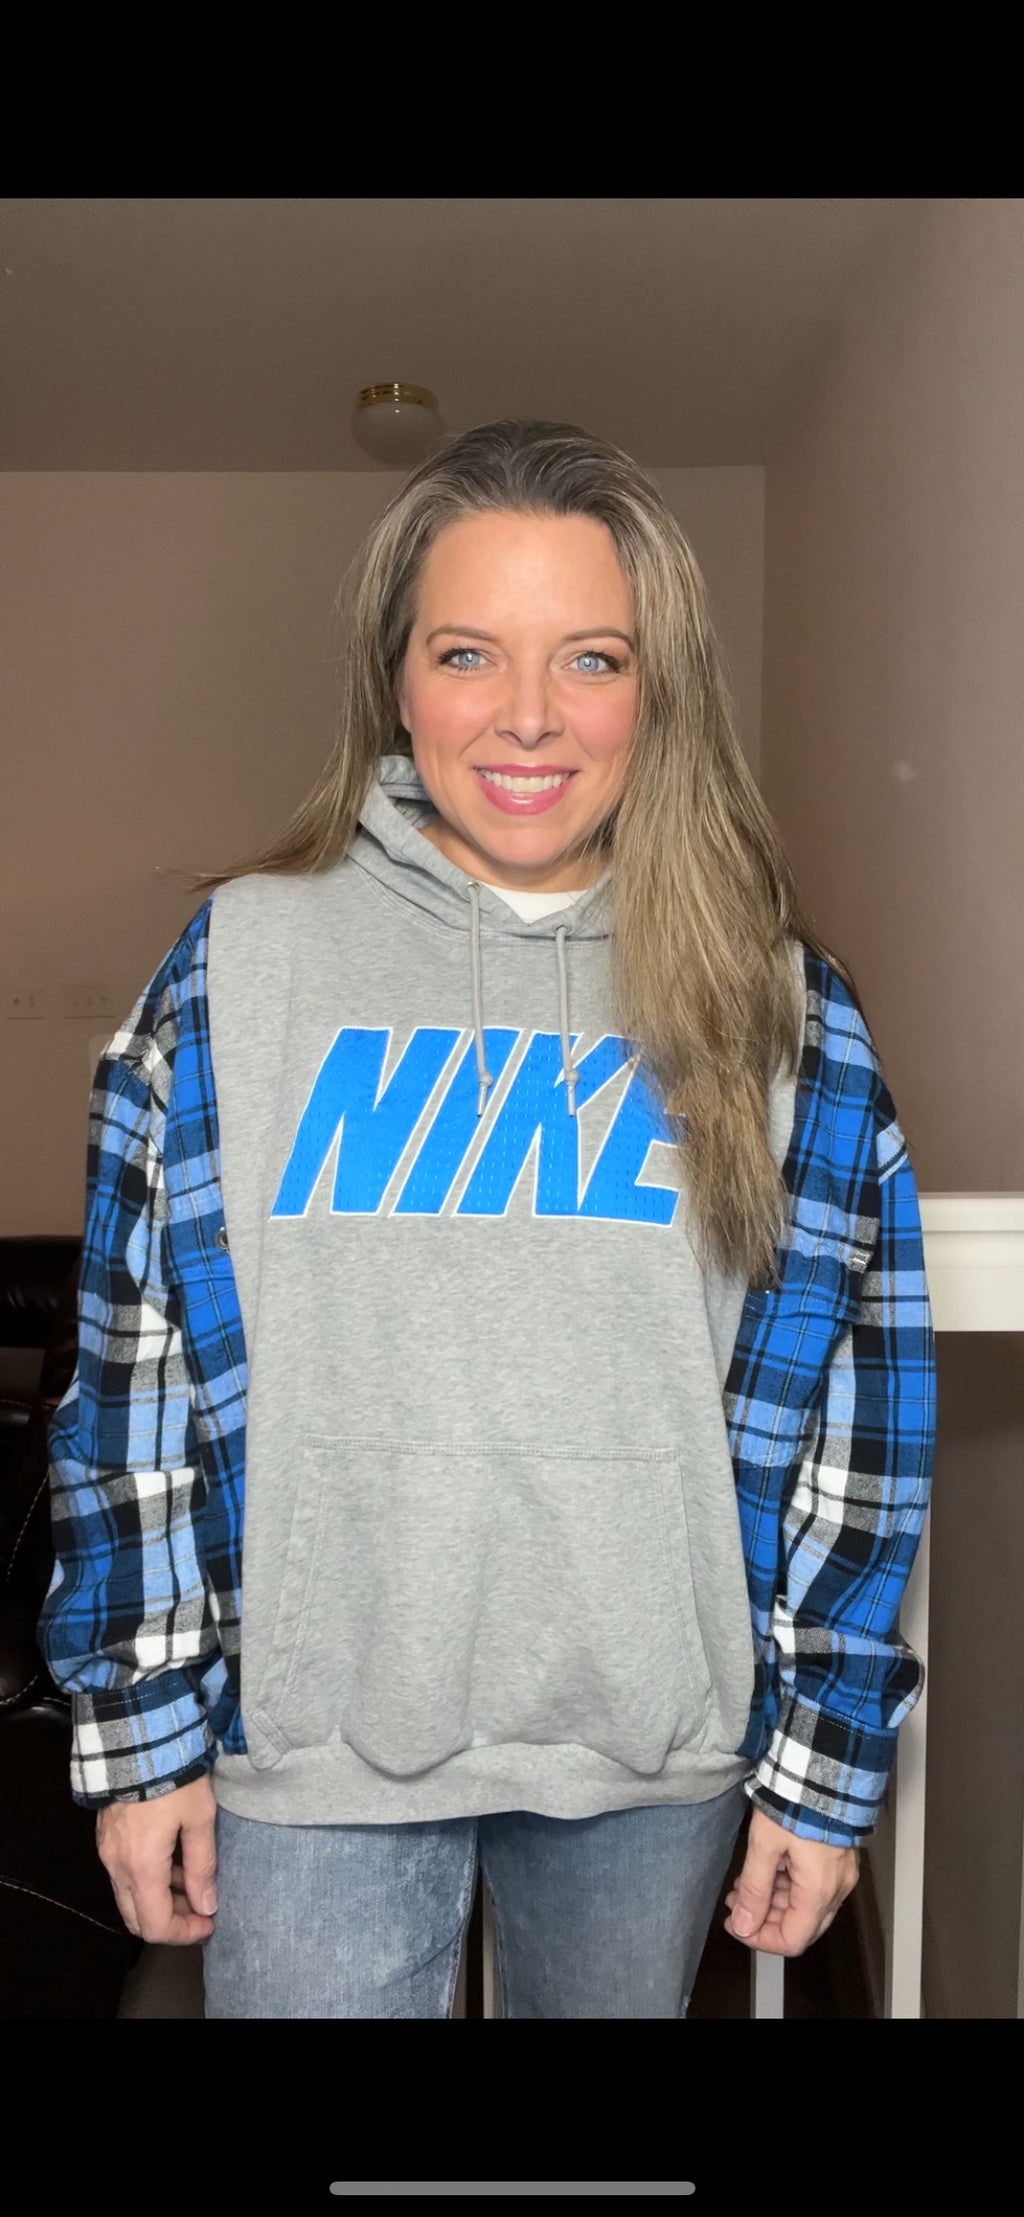 Nike Blue – women’s large – thick sweatshirt with flannel sleeves ￼